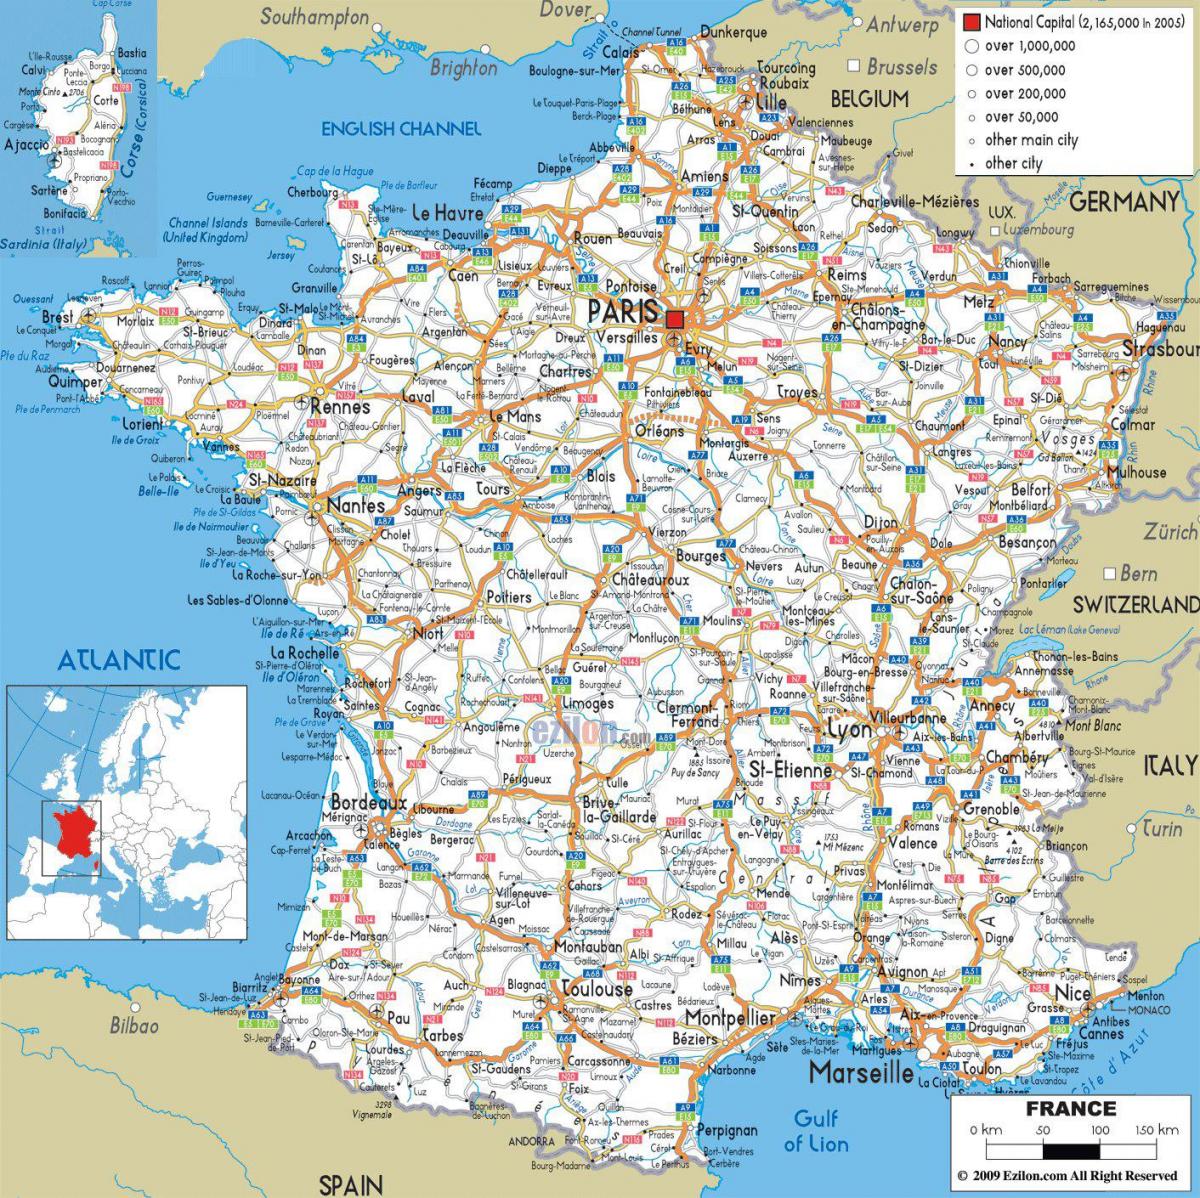 driving map of France with distances